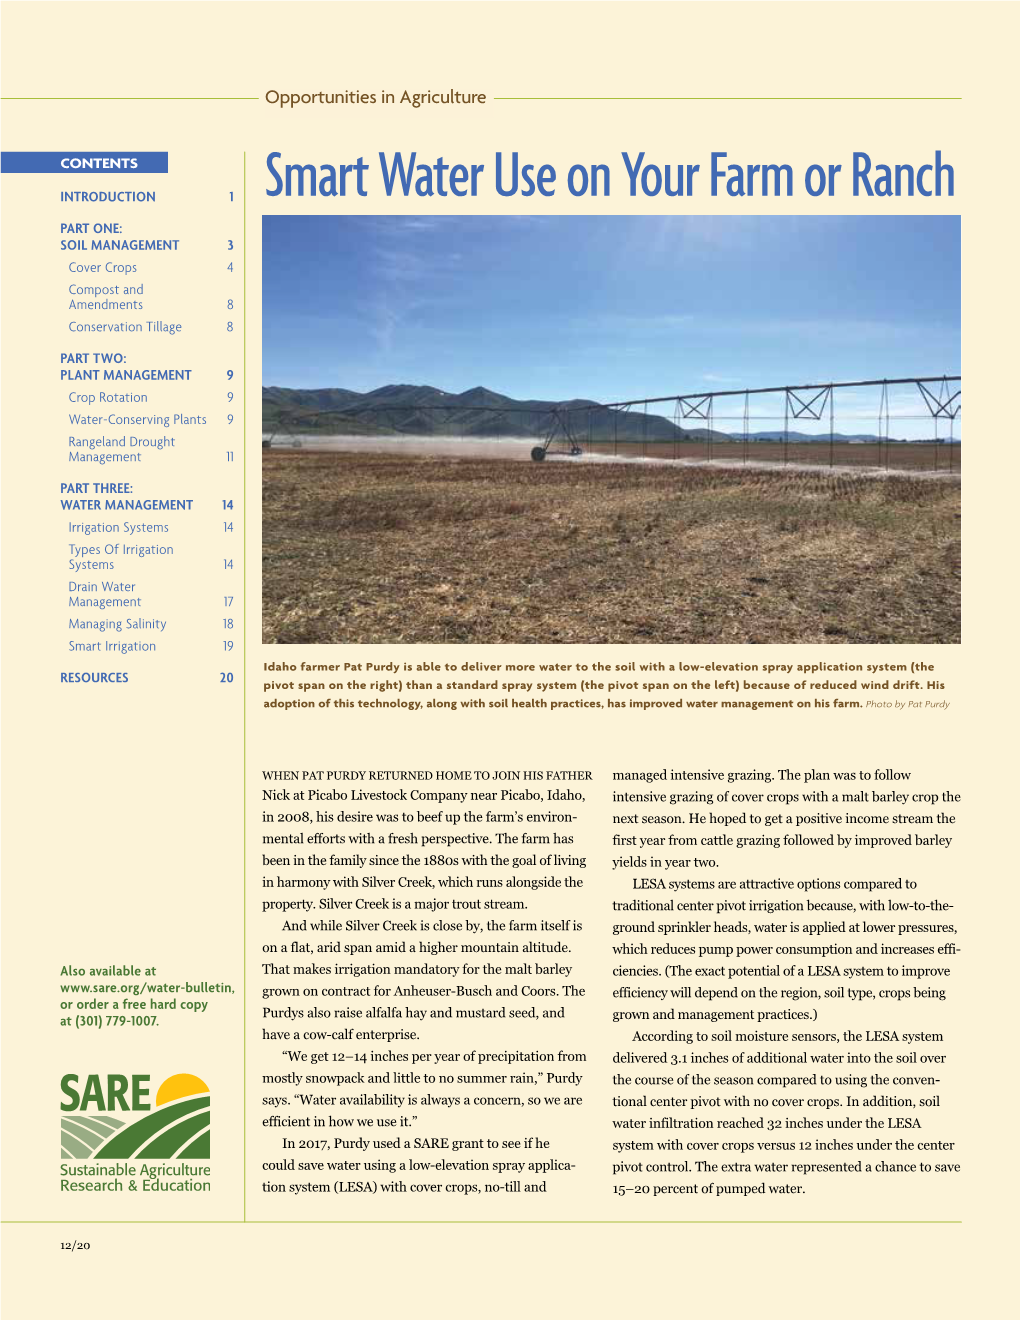 Smart Water Use on Your Farm Or Ranch PART ONE: SOIL MANAGEMENT 3 Cover Crops 4 Compost and Amendments 8 Conservation Tillage 8